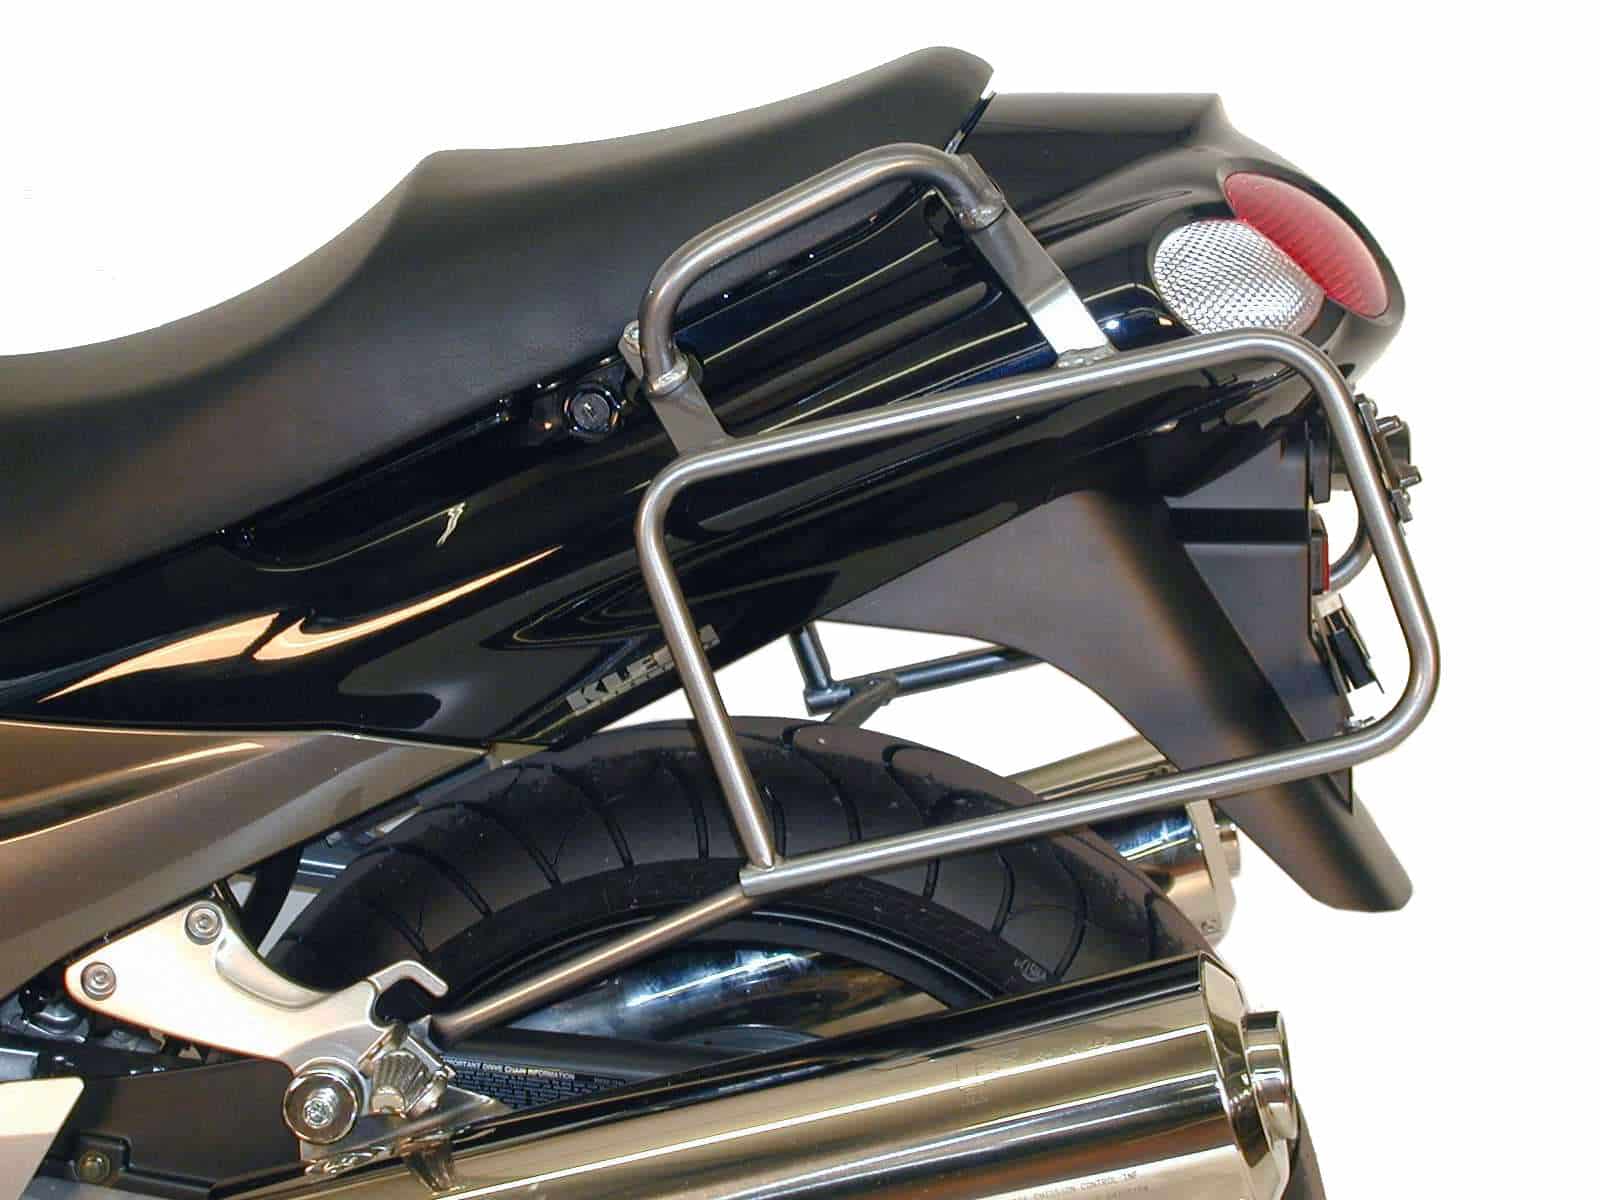 Sidecarrier permanent mounted black for Kawasaki ZZR 1200 (2002-2005)